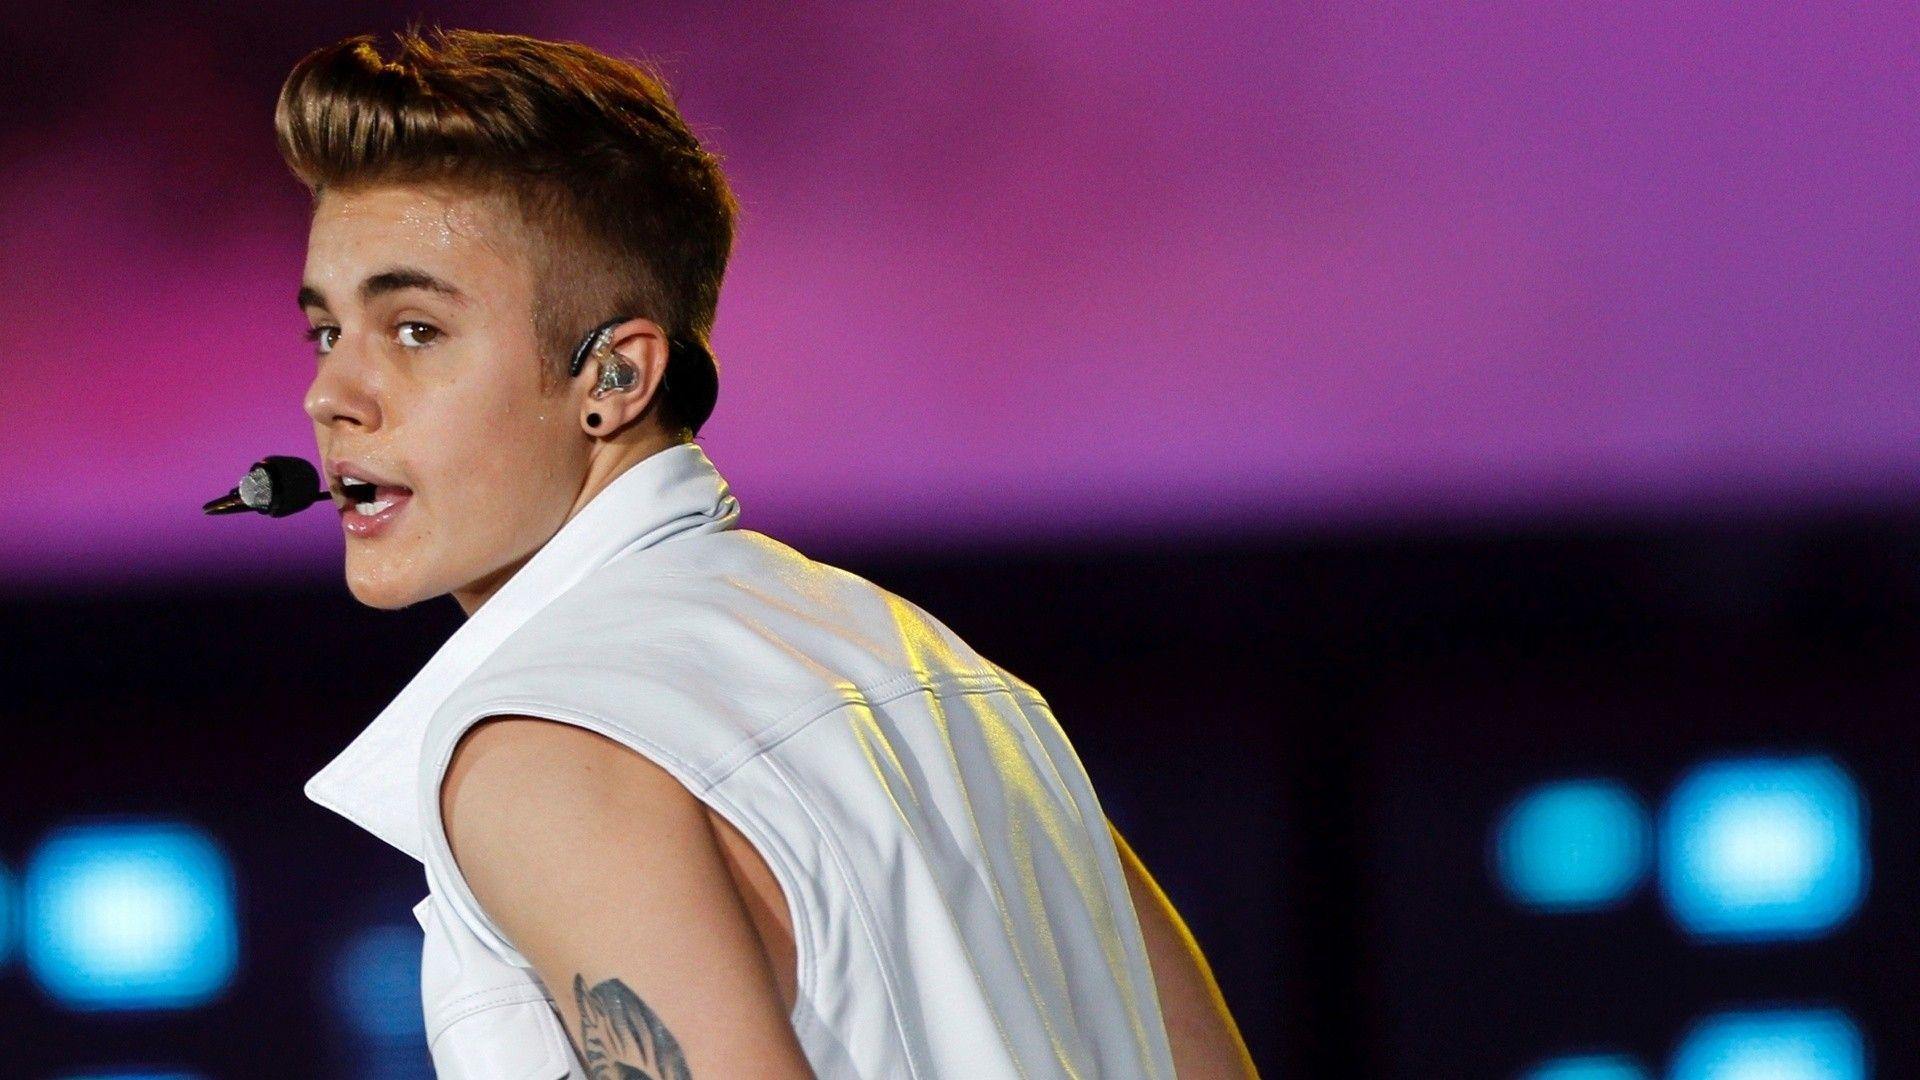 Justin Bieber in Perofrmance with White Clothes Wallpaper